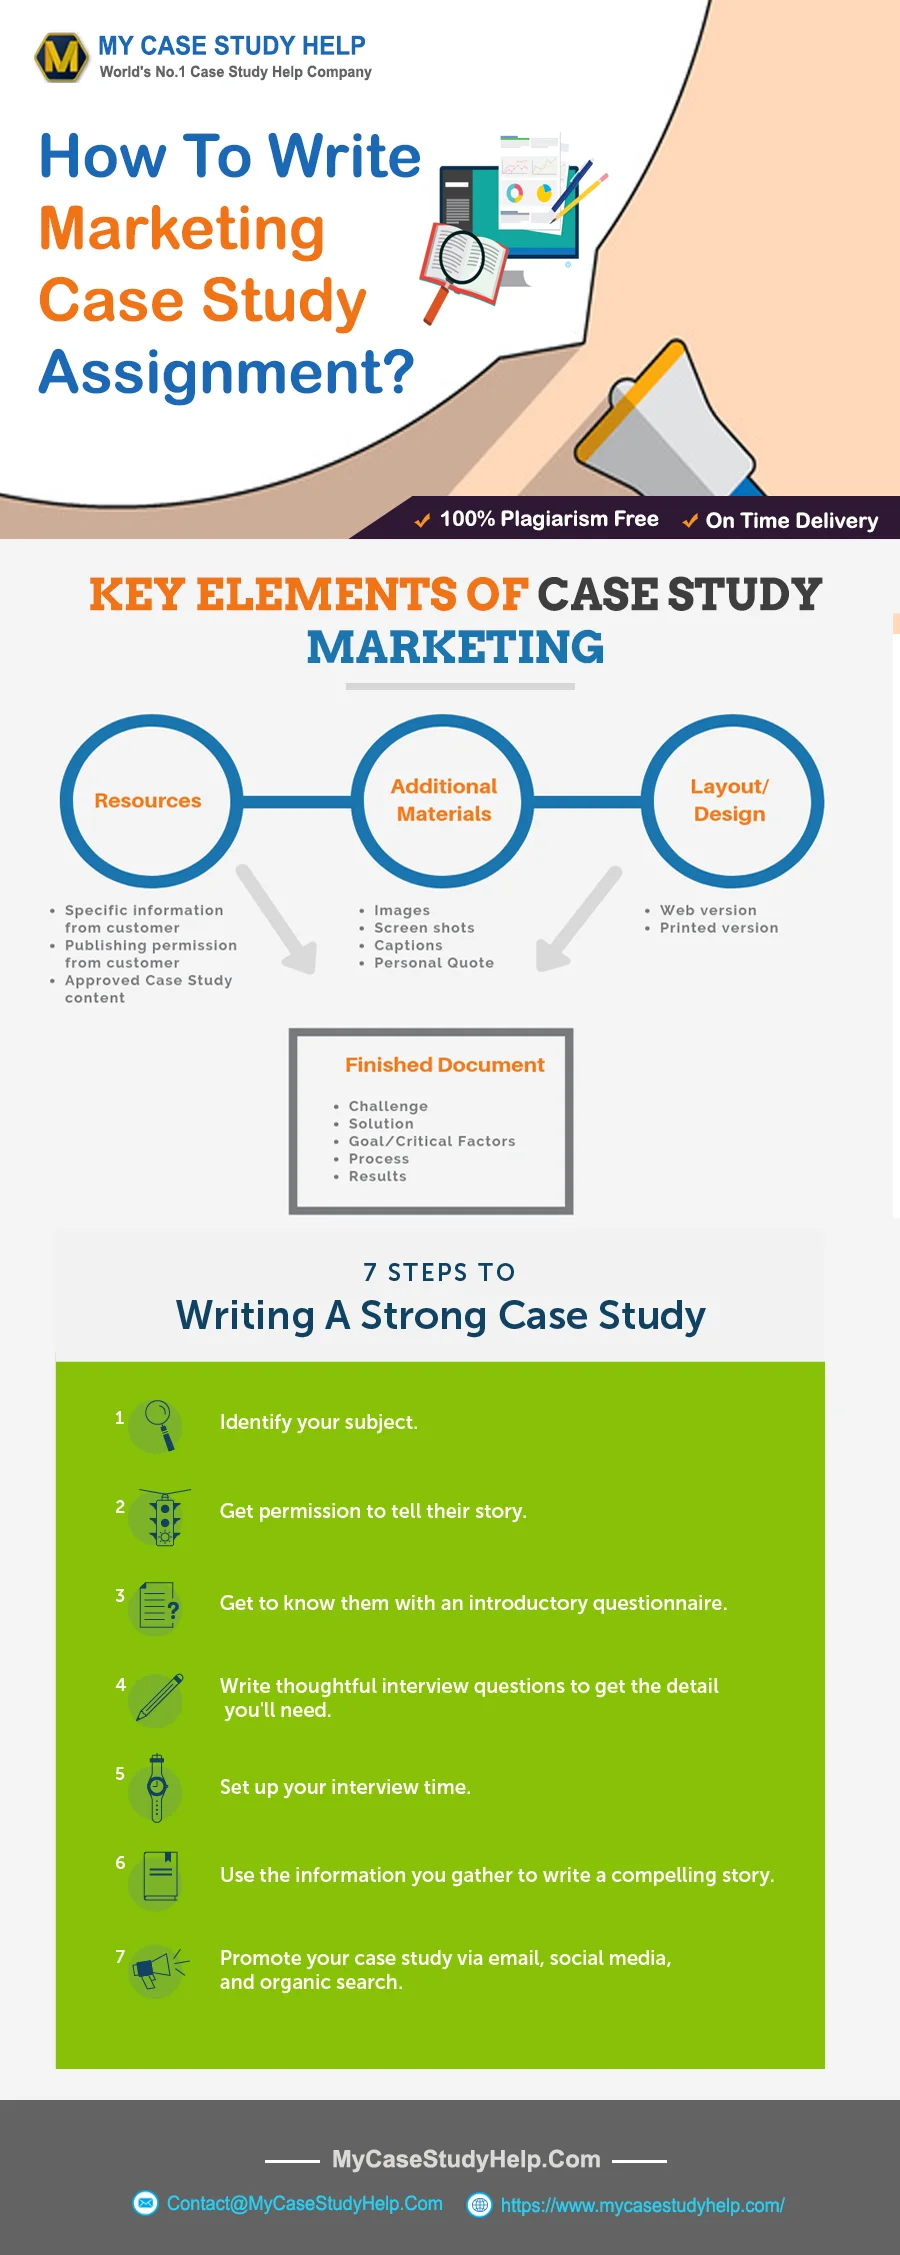 How To Write a Marketing Case Study Assignment